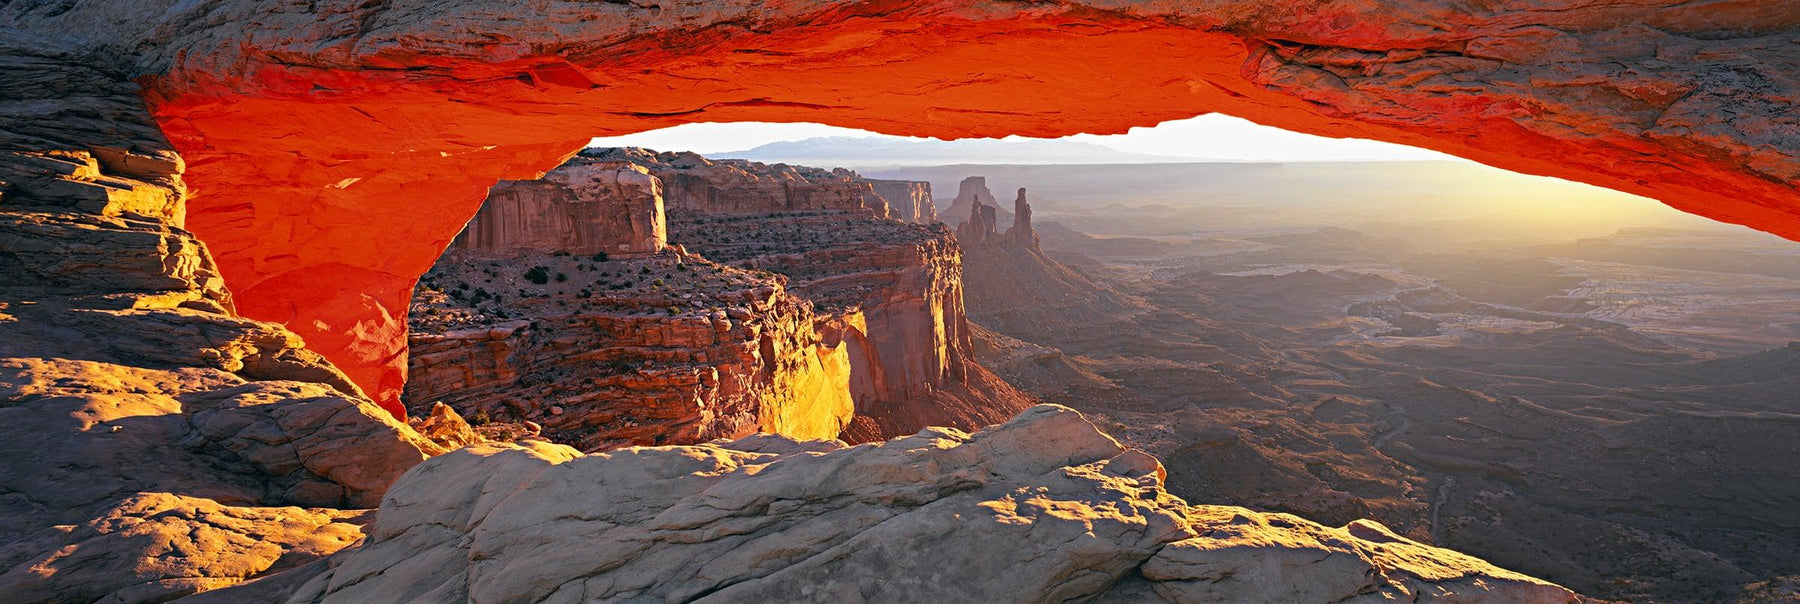 Sun shining through the rock arch that overlooks the valley of Canyonlands National Park Utah 